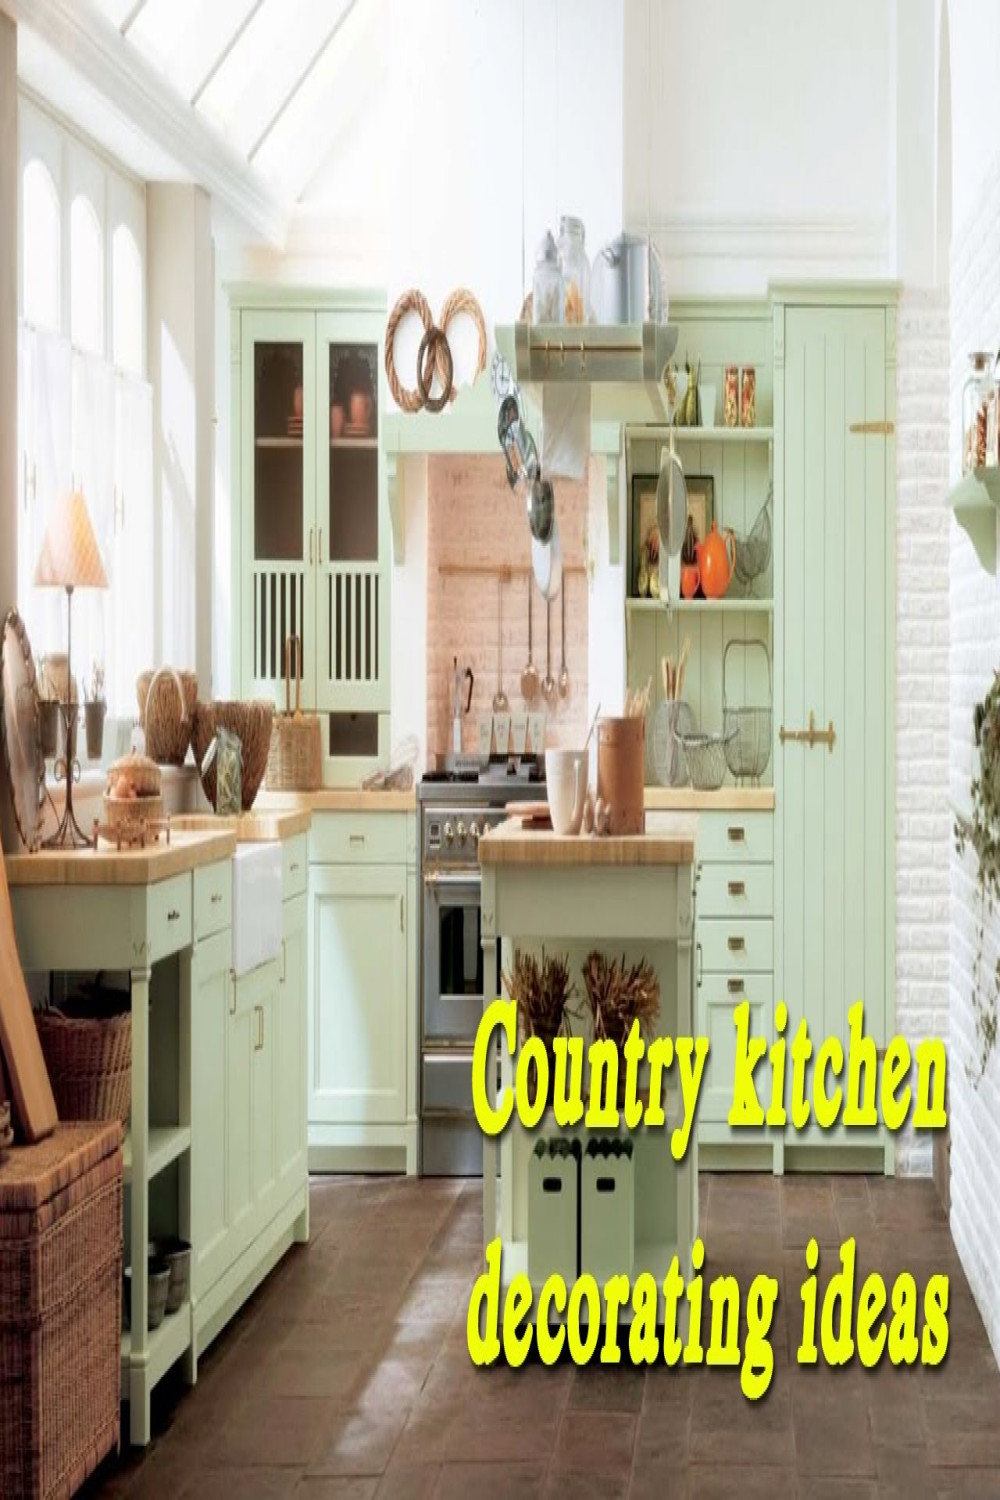 Country Kitchen Decorating Ideas - Vintage Kitchen Decorating Ideas, Retro  Kitchen Design Ideas